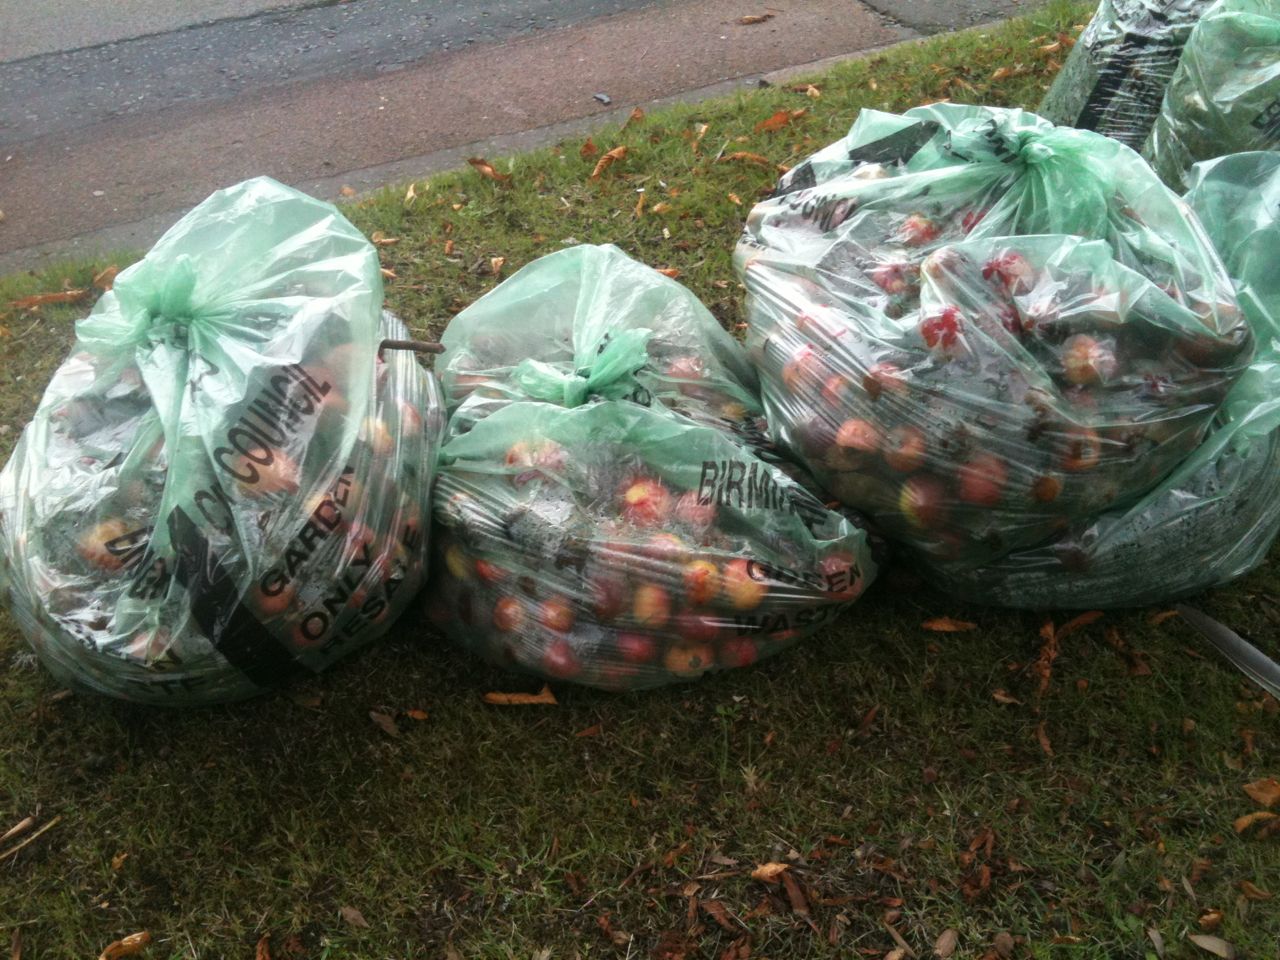 apples going to waste